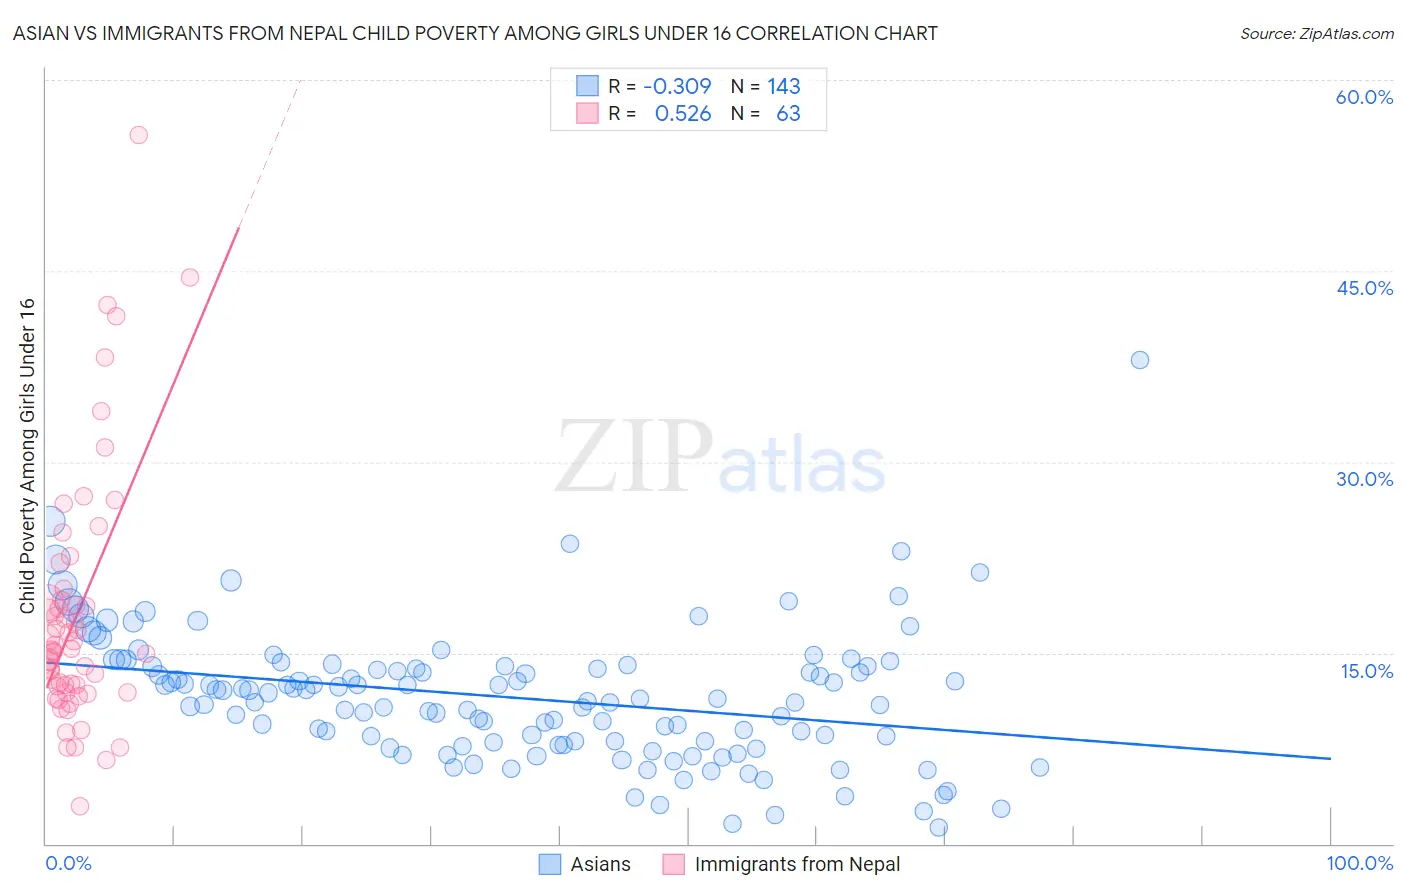 Asian vs Immigrants from Nepal Child Poverty Among Girls Under 16